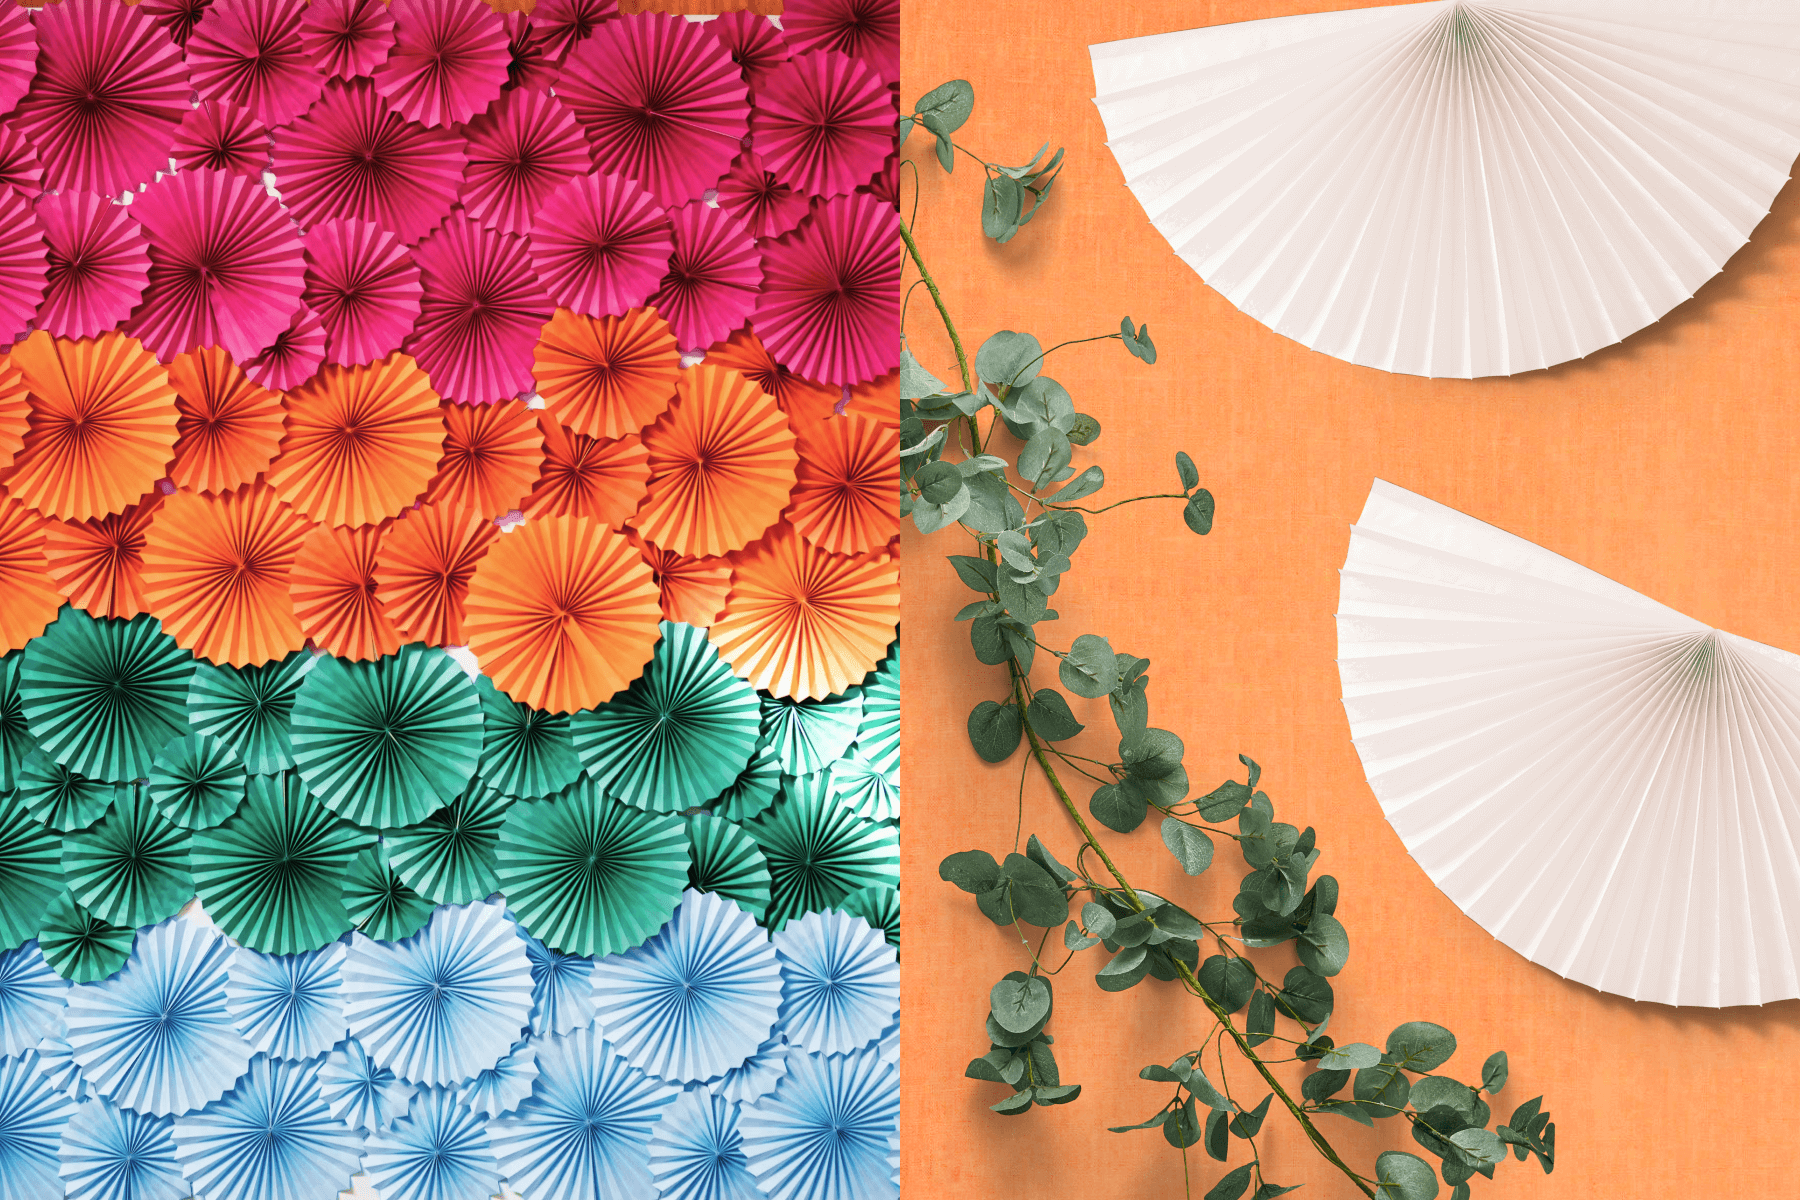 left: Colorful circular fan decorations arranged from top to bottom: Fuchsia, orange, green, blue. Right: An orange background with a branch of eucalyptus and two white fan semi-circle decorations.